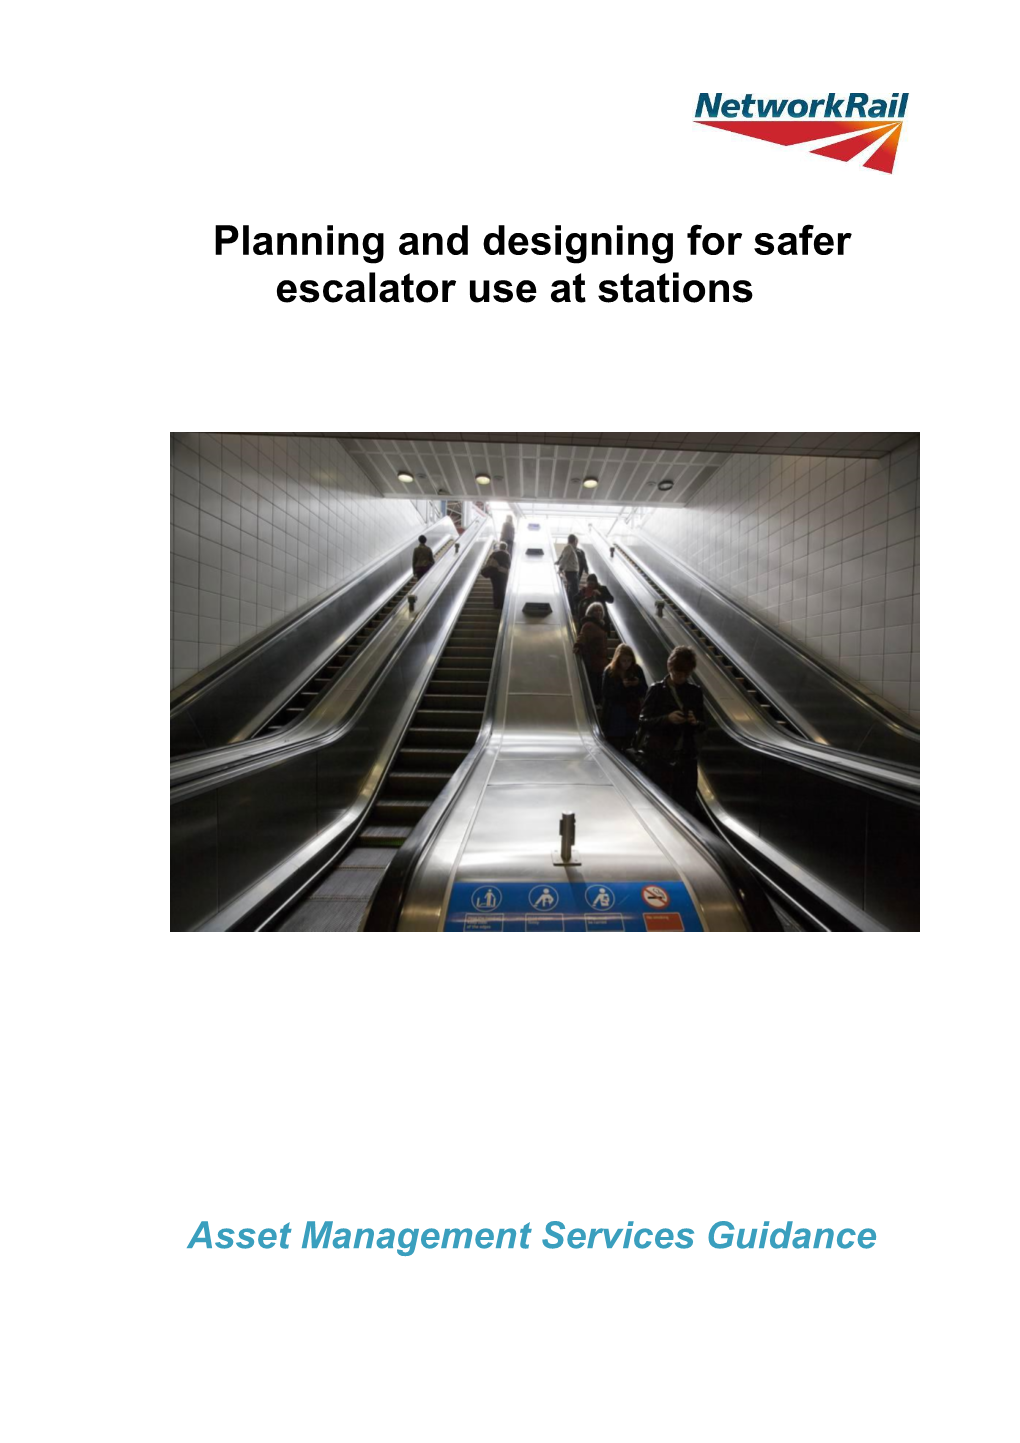 Planning and Designing for Safer Escalator Use at Stations